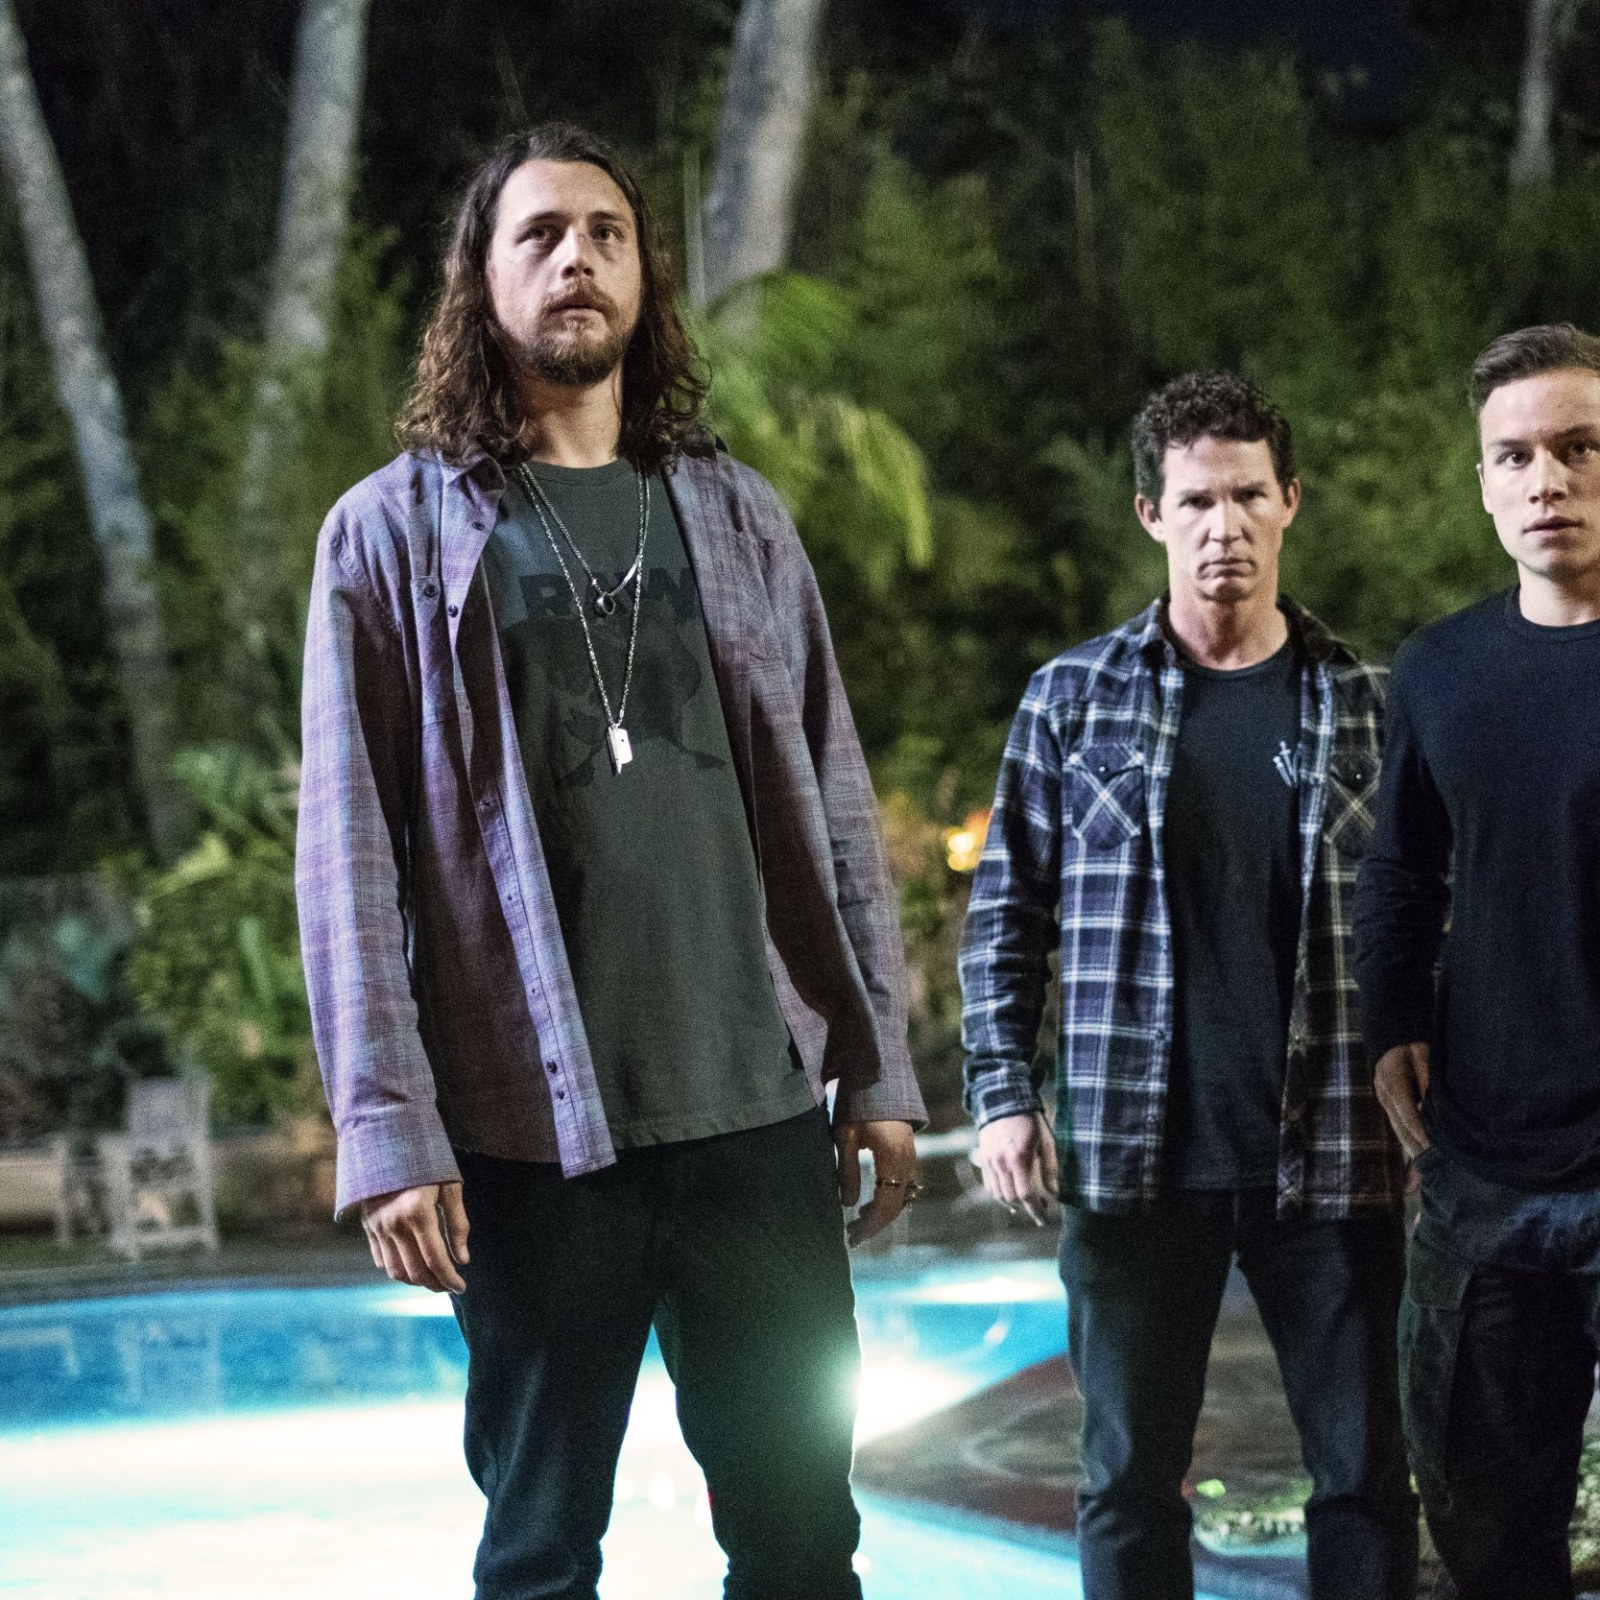 Animal Kingdom' Season 3 Spoilers: Episode 8 Synopsis Released; Watch  'Incoming' Promo